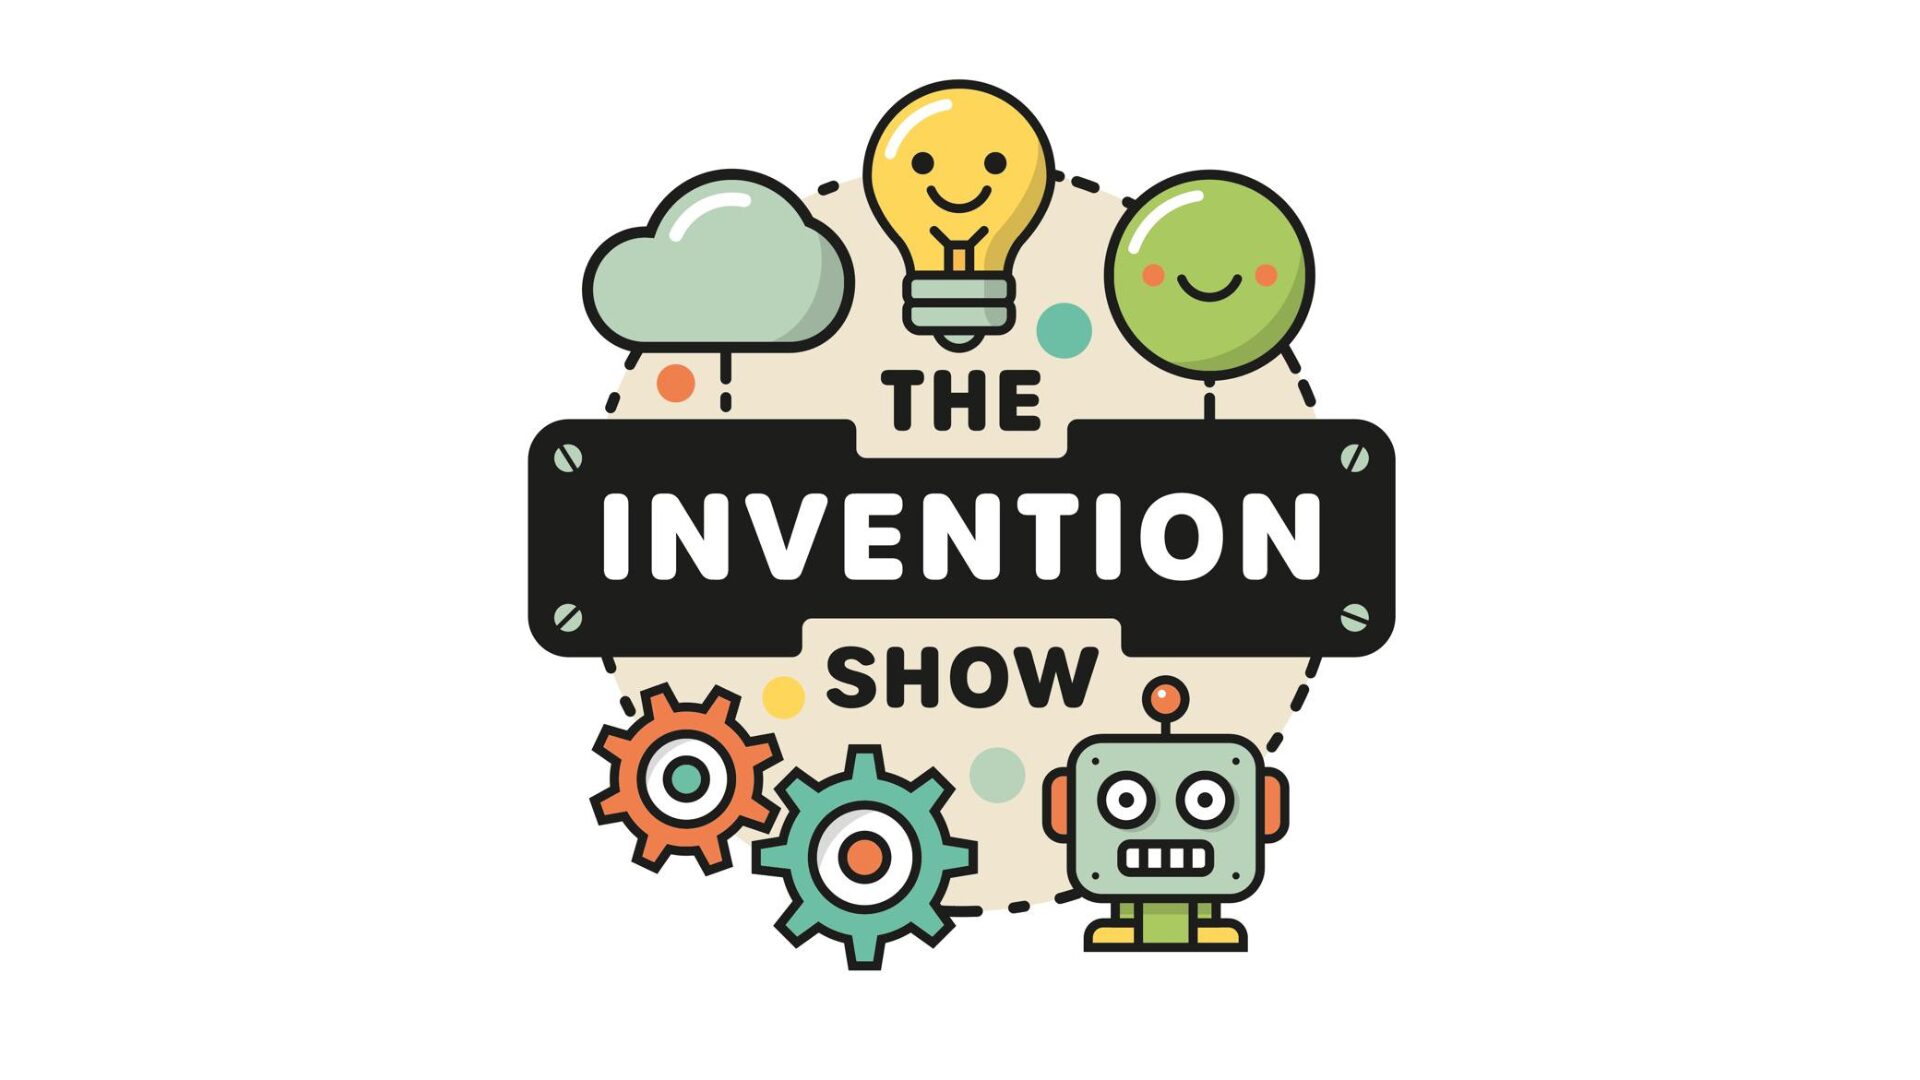 The Invention show